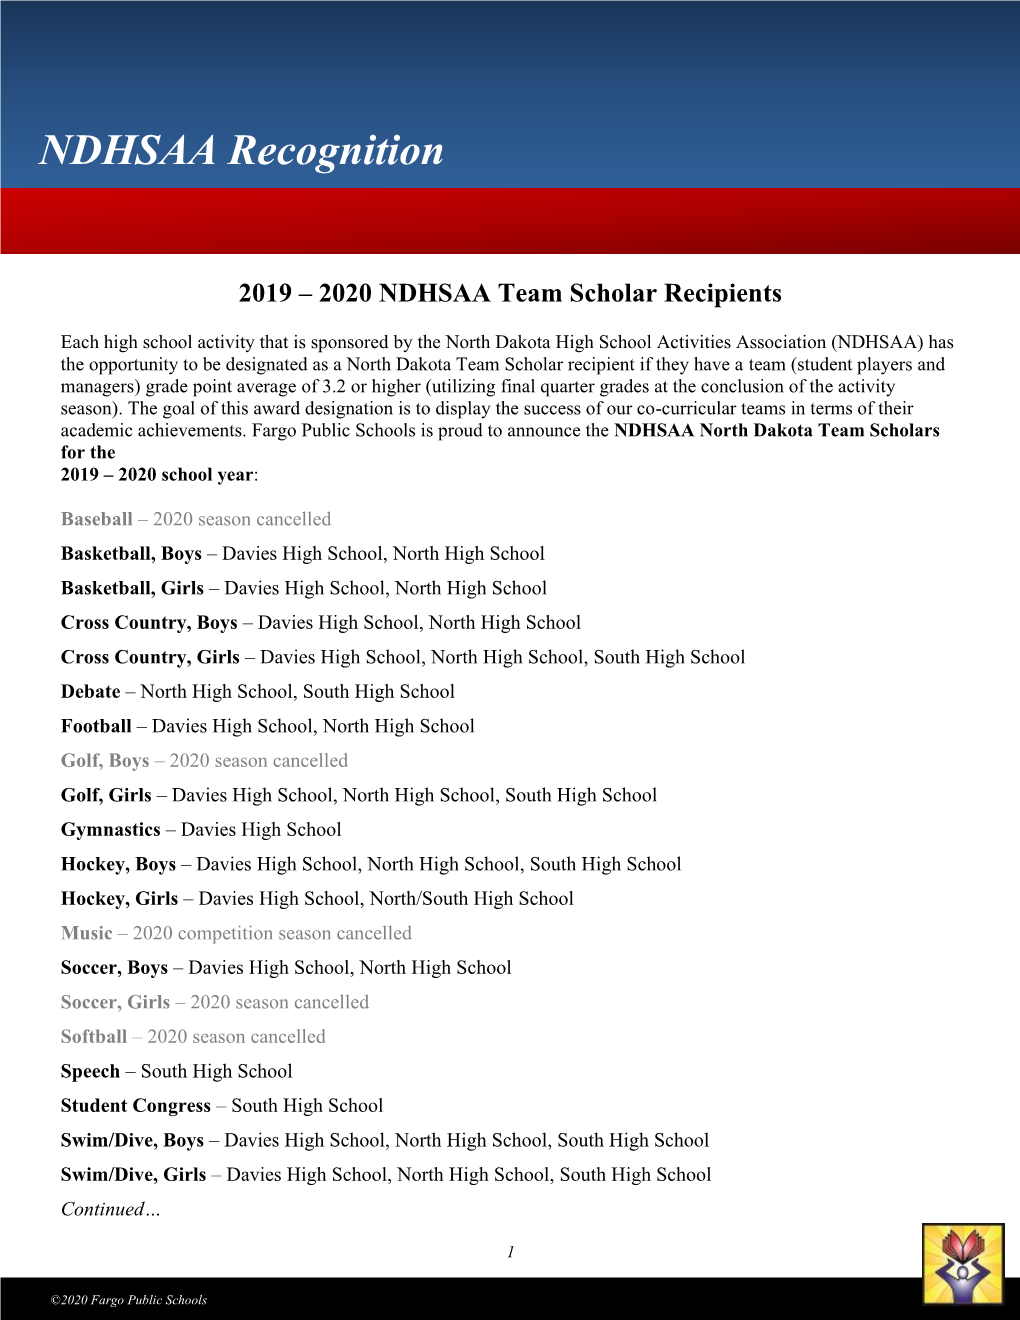 NDHSAA Recognition